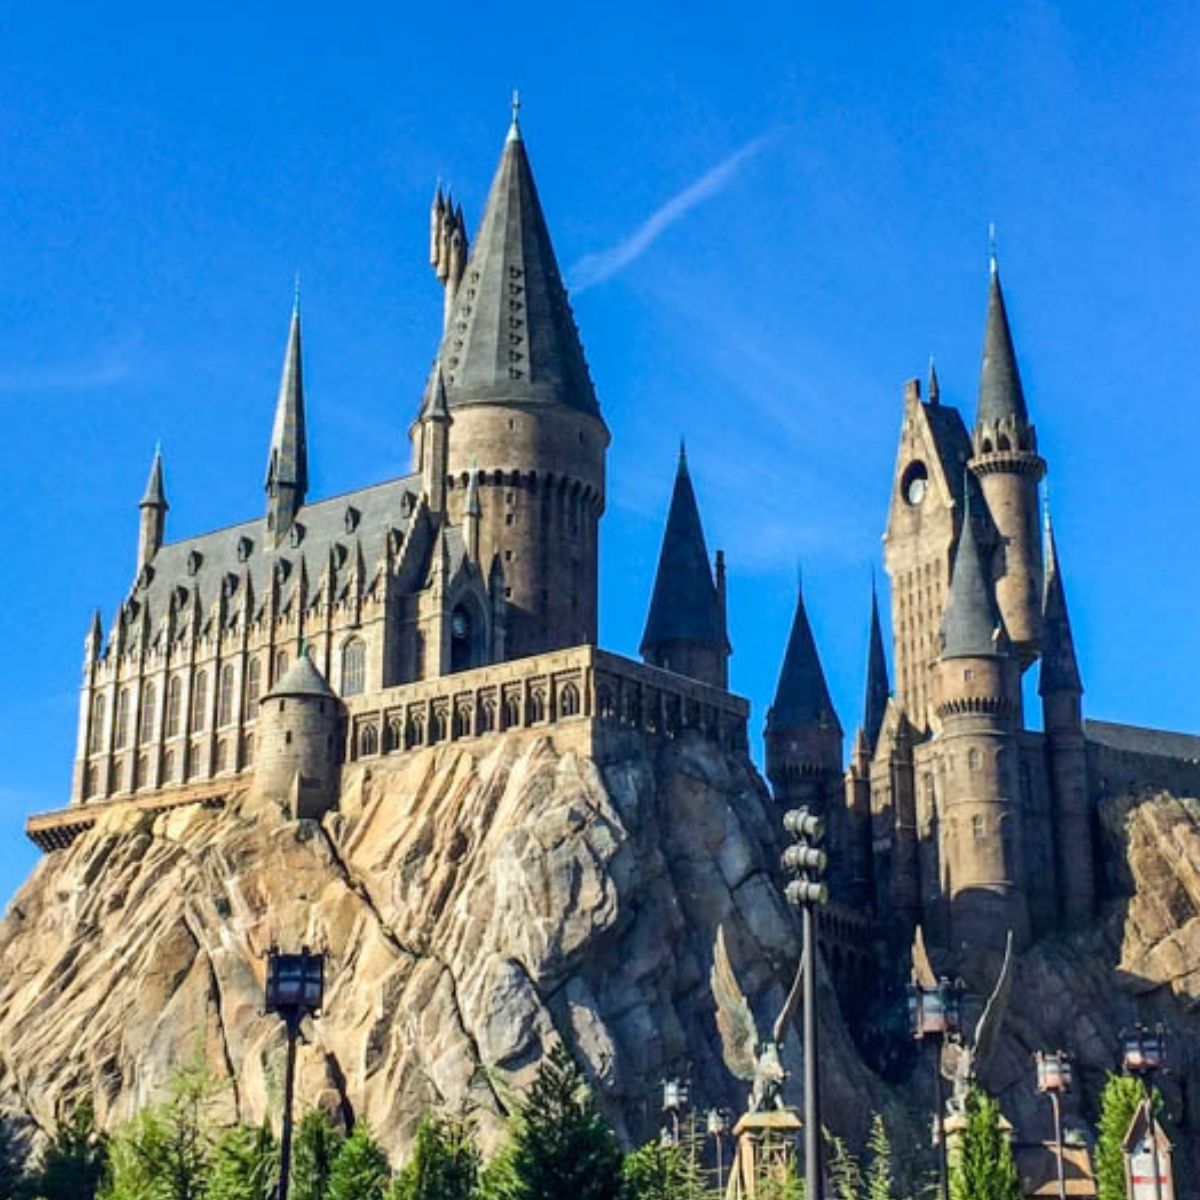 The Hogwarts castle at Universal in Orlando.